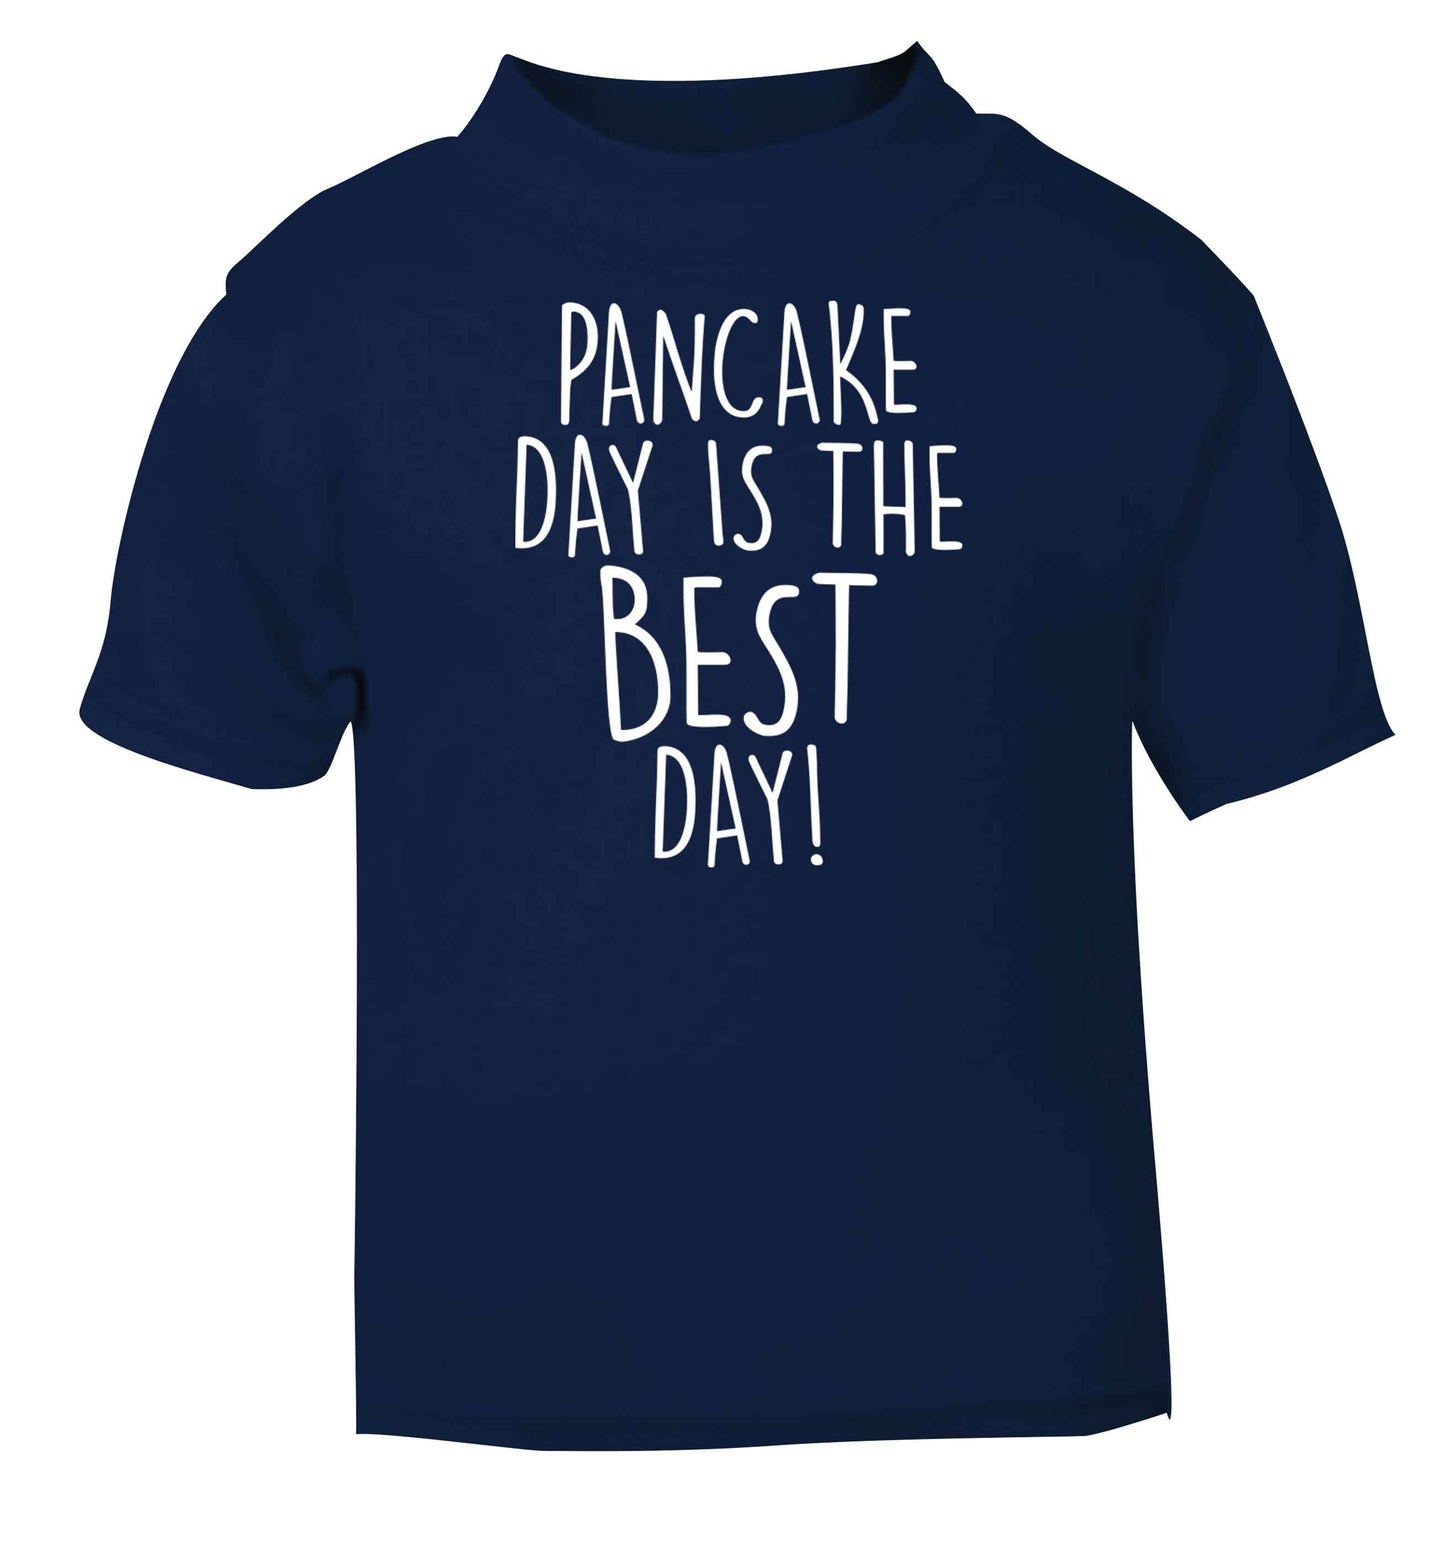 Pancake day is the best day navy baby toddler Tshirt 2 Years